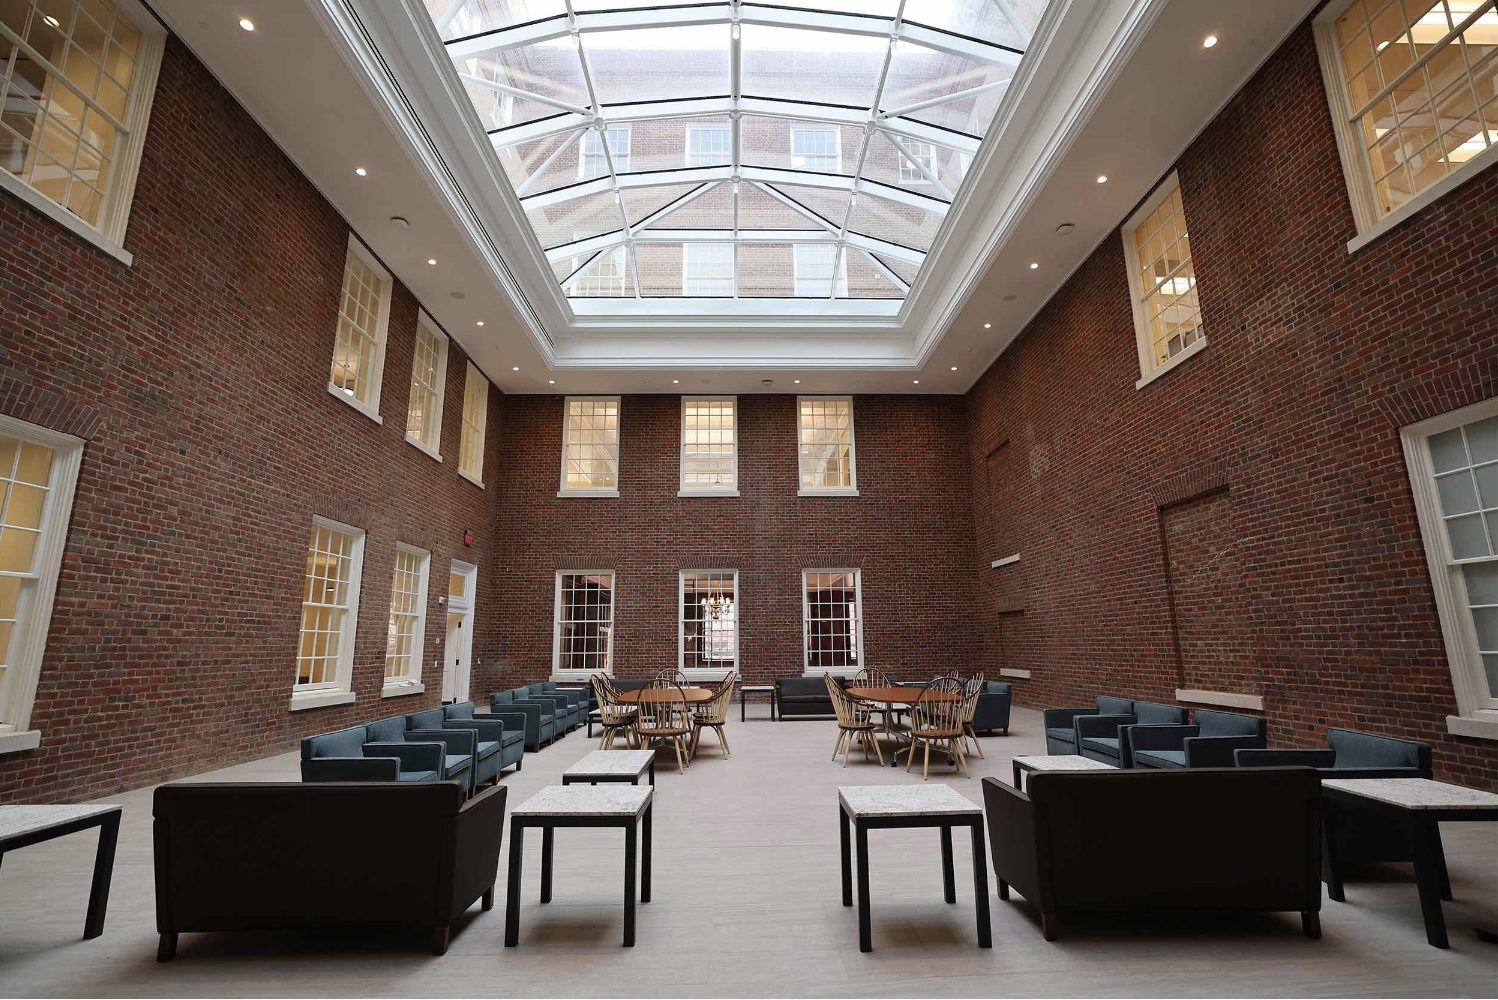 Image of new room in UVA Alderman Library with Large skylight